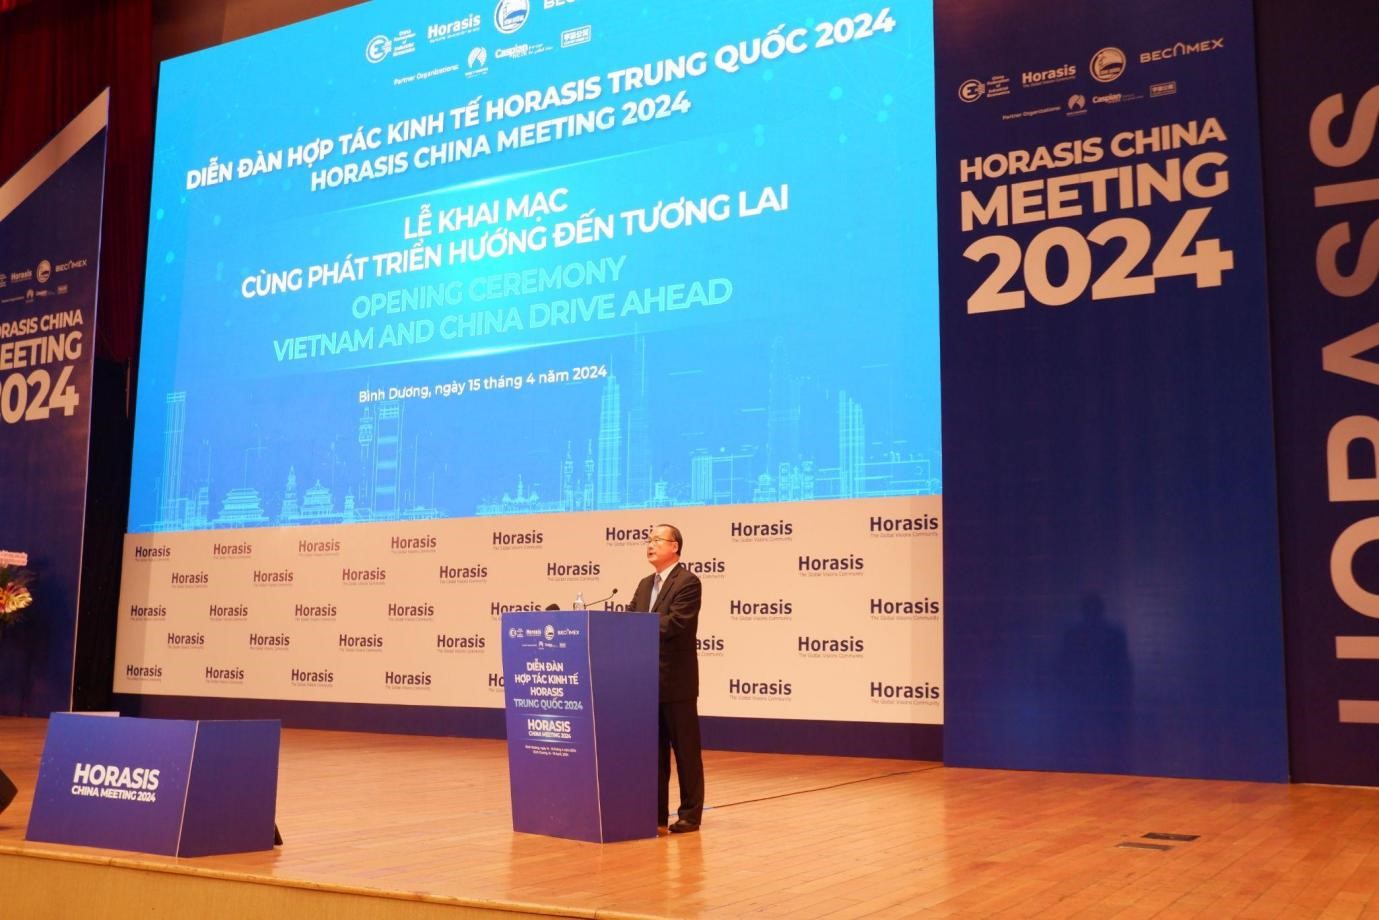 Dr Jonathan Choi delivered Welcome remarks at the Grand Opening of the Horasis China Meeting 2024